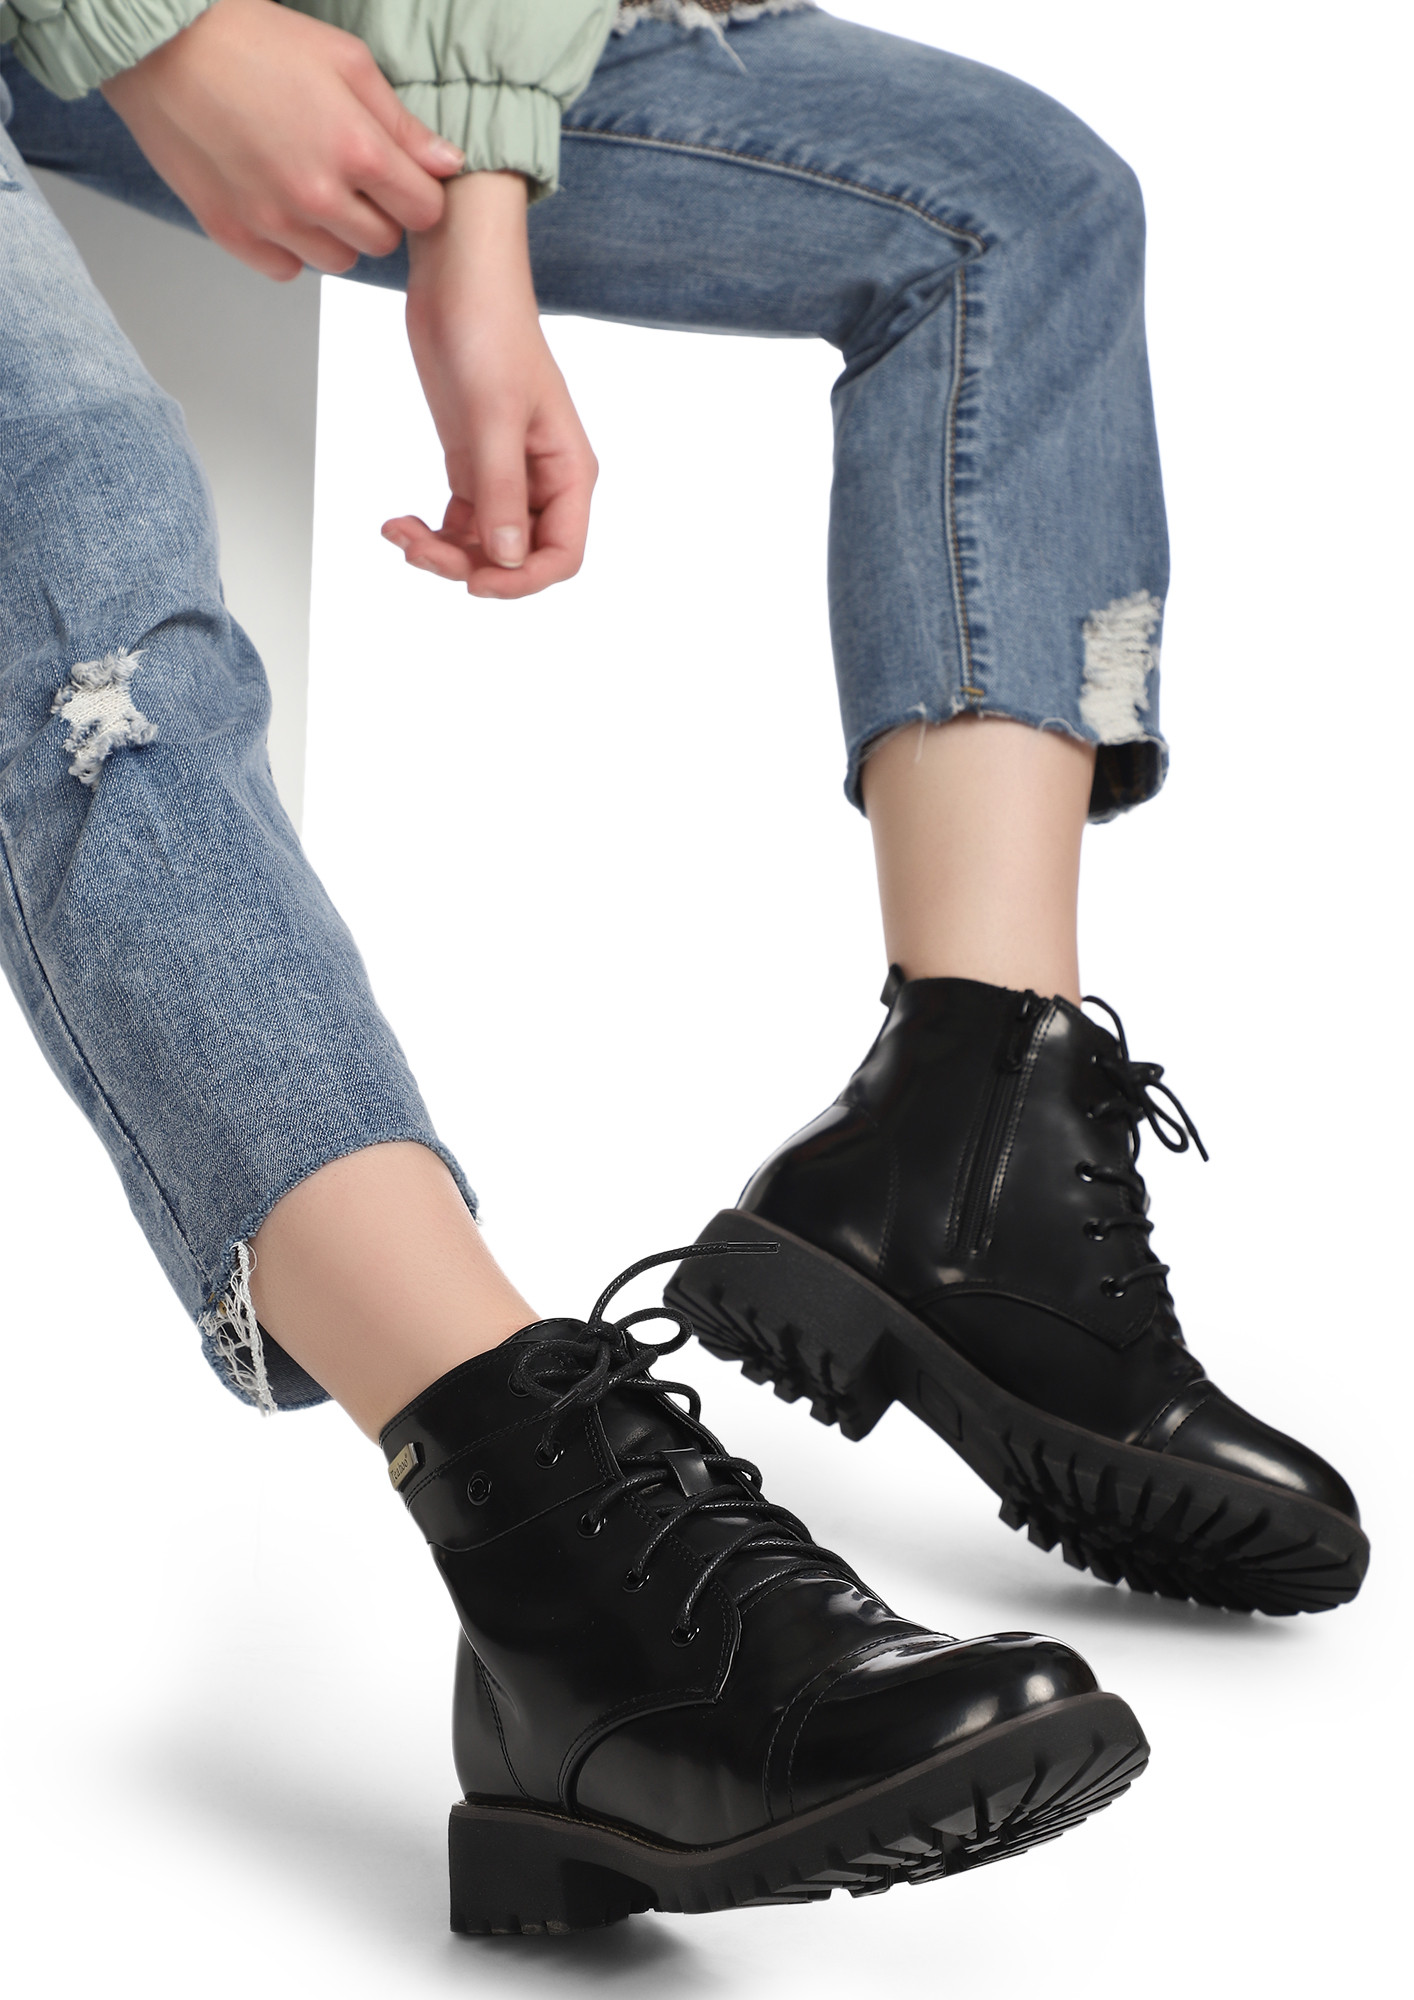 GAME ON GIRL BLACK PATENT LACE-UP BOOTS